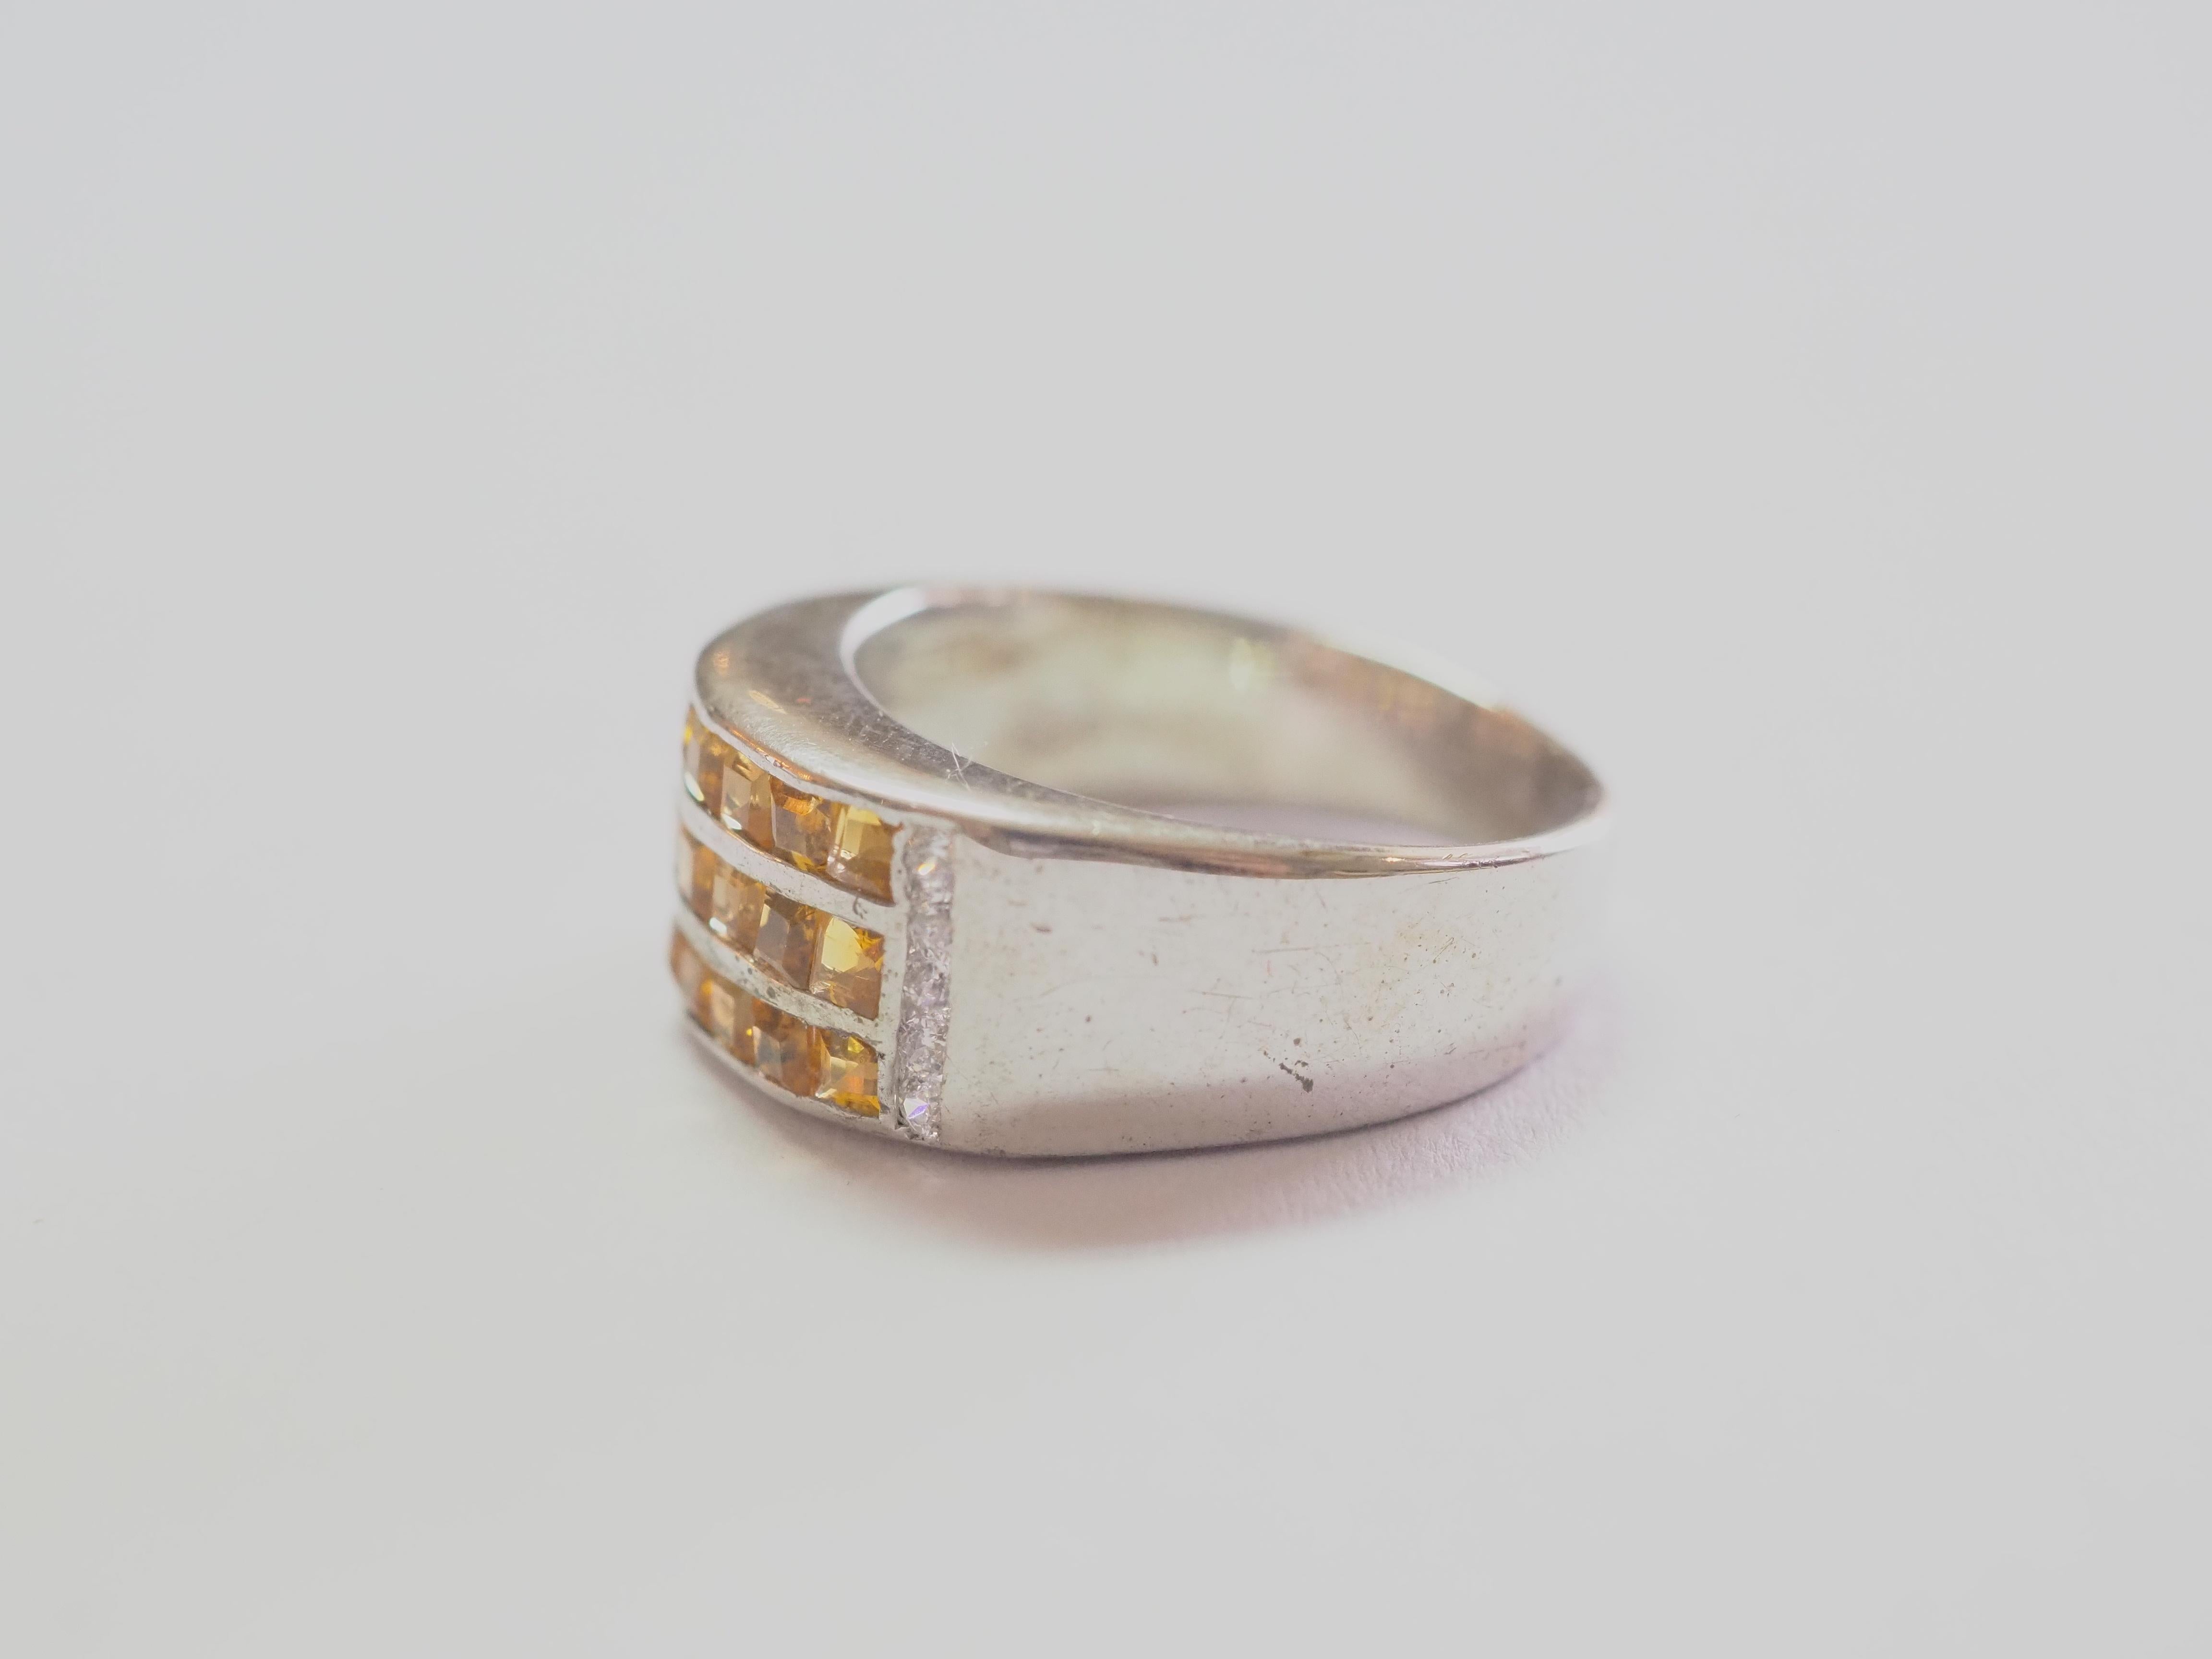 Opportunity starting at only 50!

This ring is a beautiful wide band ring in solid sterling silver. The ring is decorated by natural squared yellow citrine masterfully channeled into 3 lines. The vibrant citrine gemstone is one of the most popular